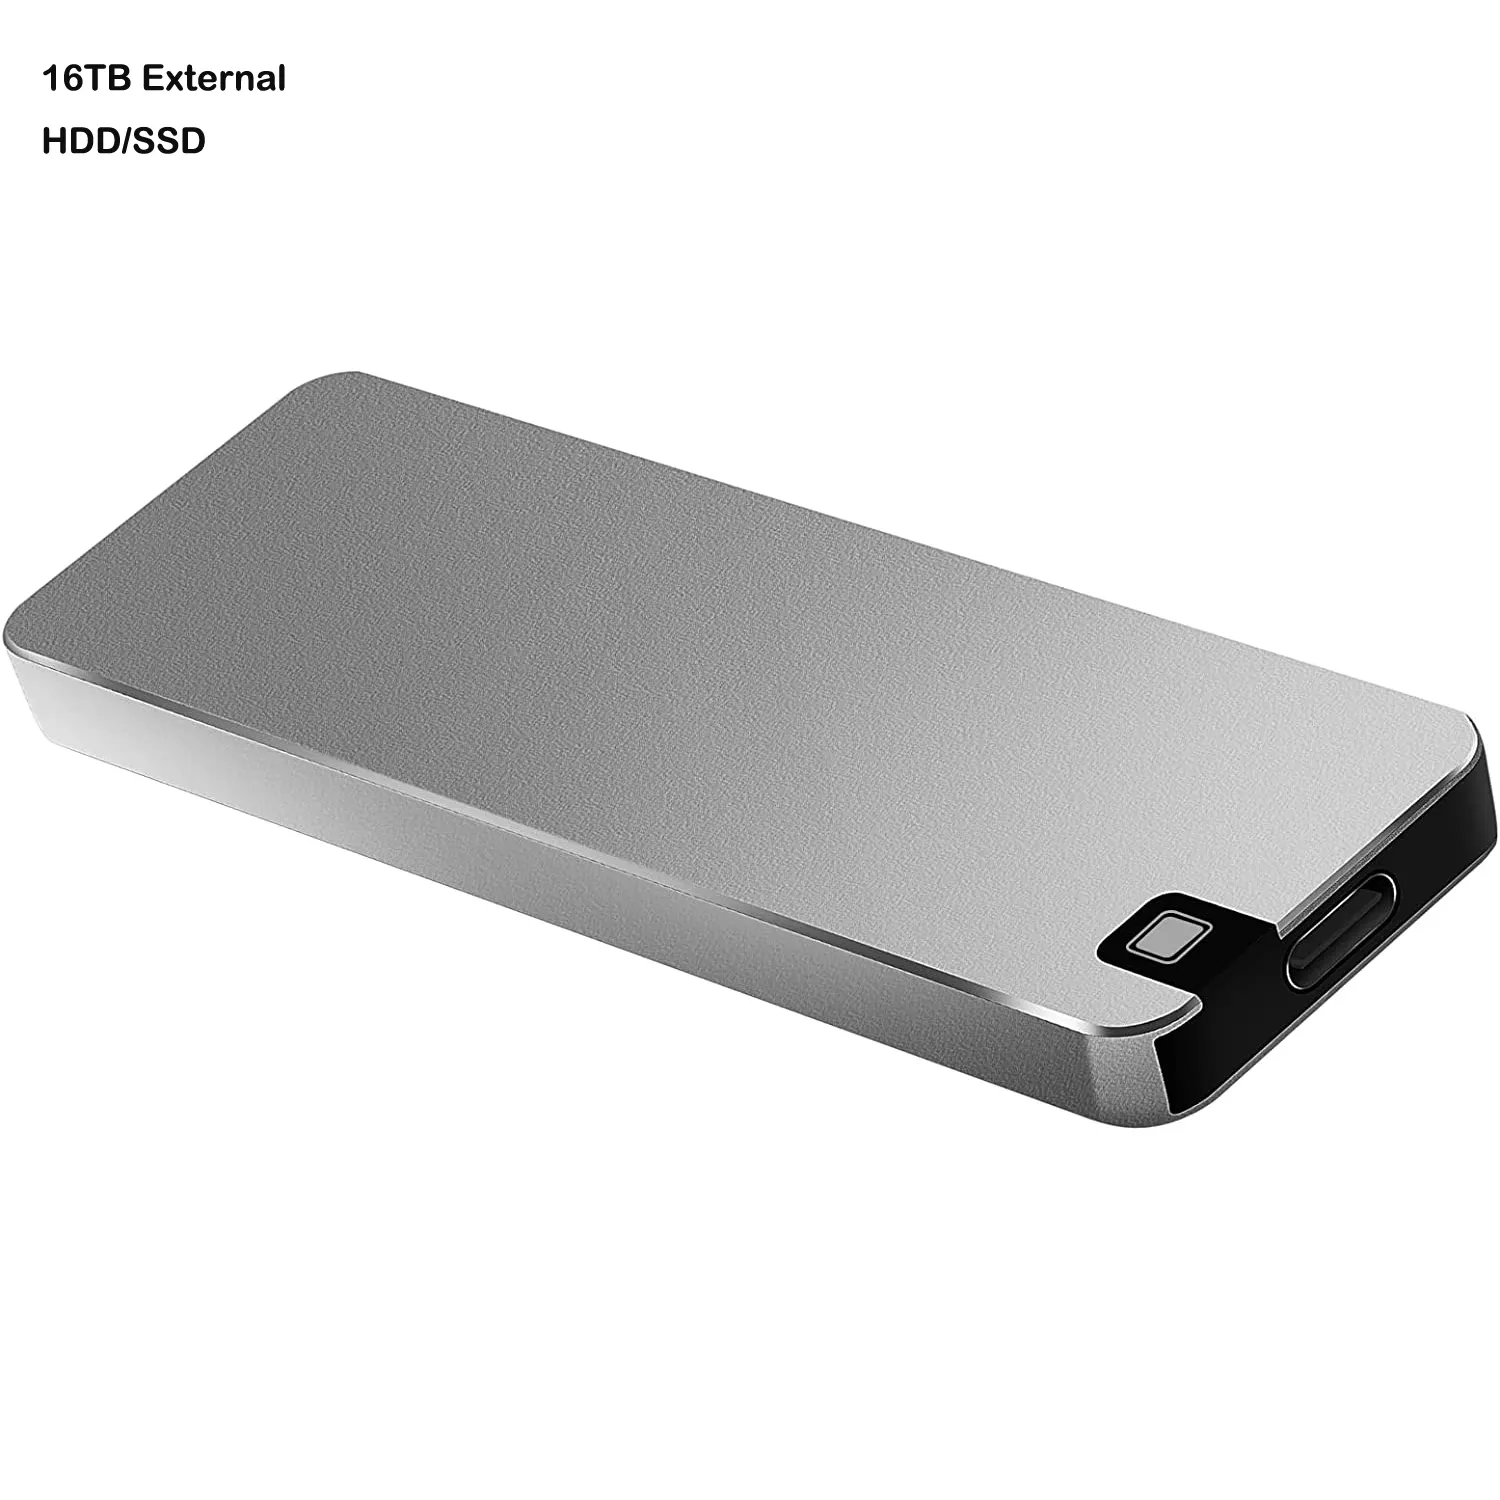 Compatible with Mac Windows 64GB External HDD Super Fast Portable SSD External Hard Drive Read Speed Up to 500Mb/s SSD